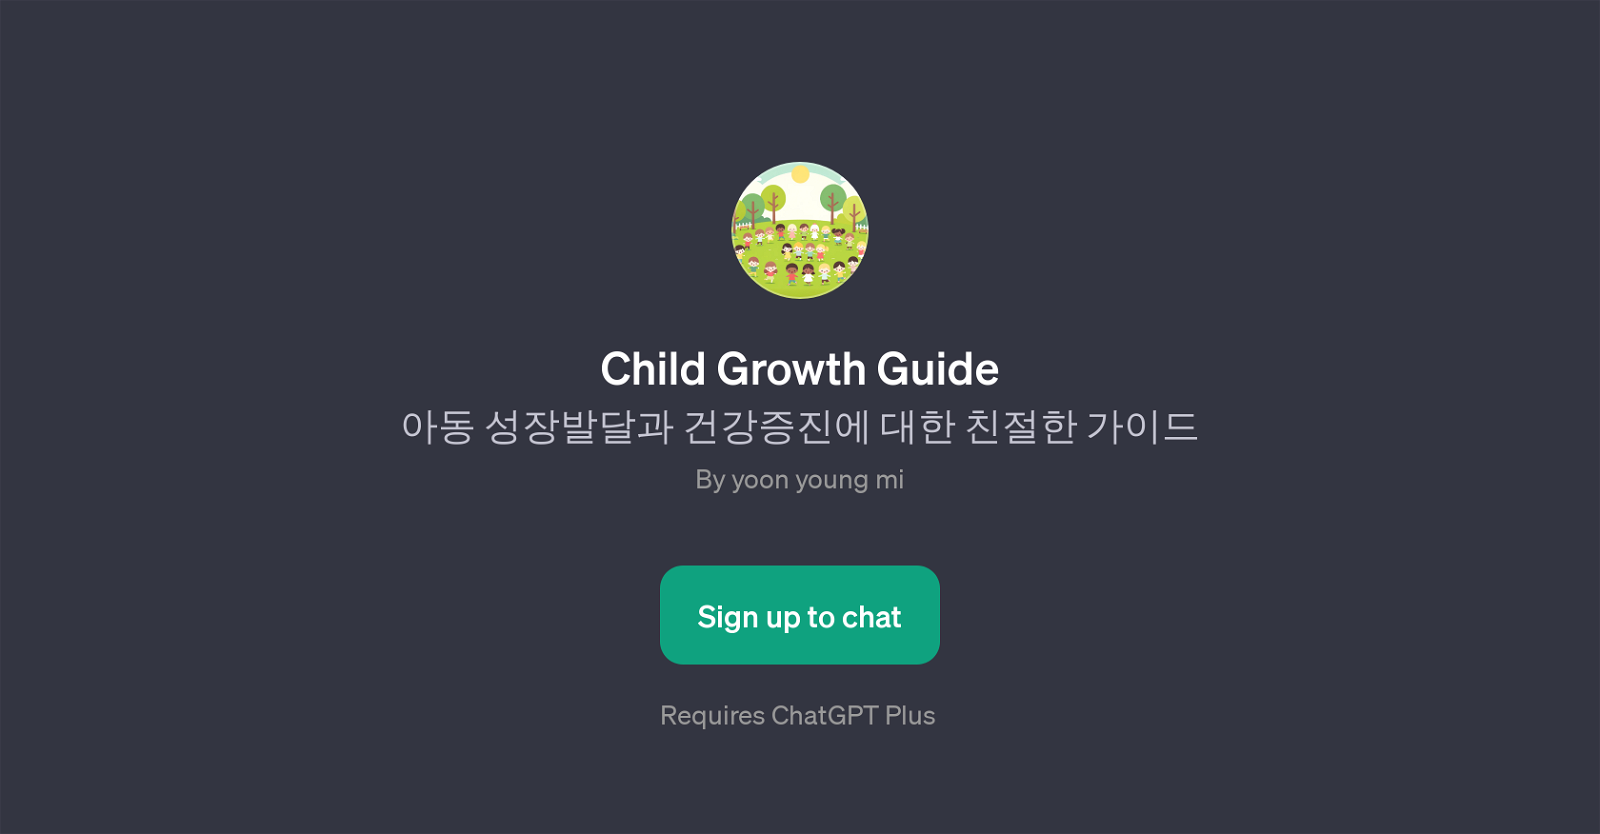 Child Growth Guide website